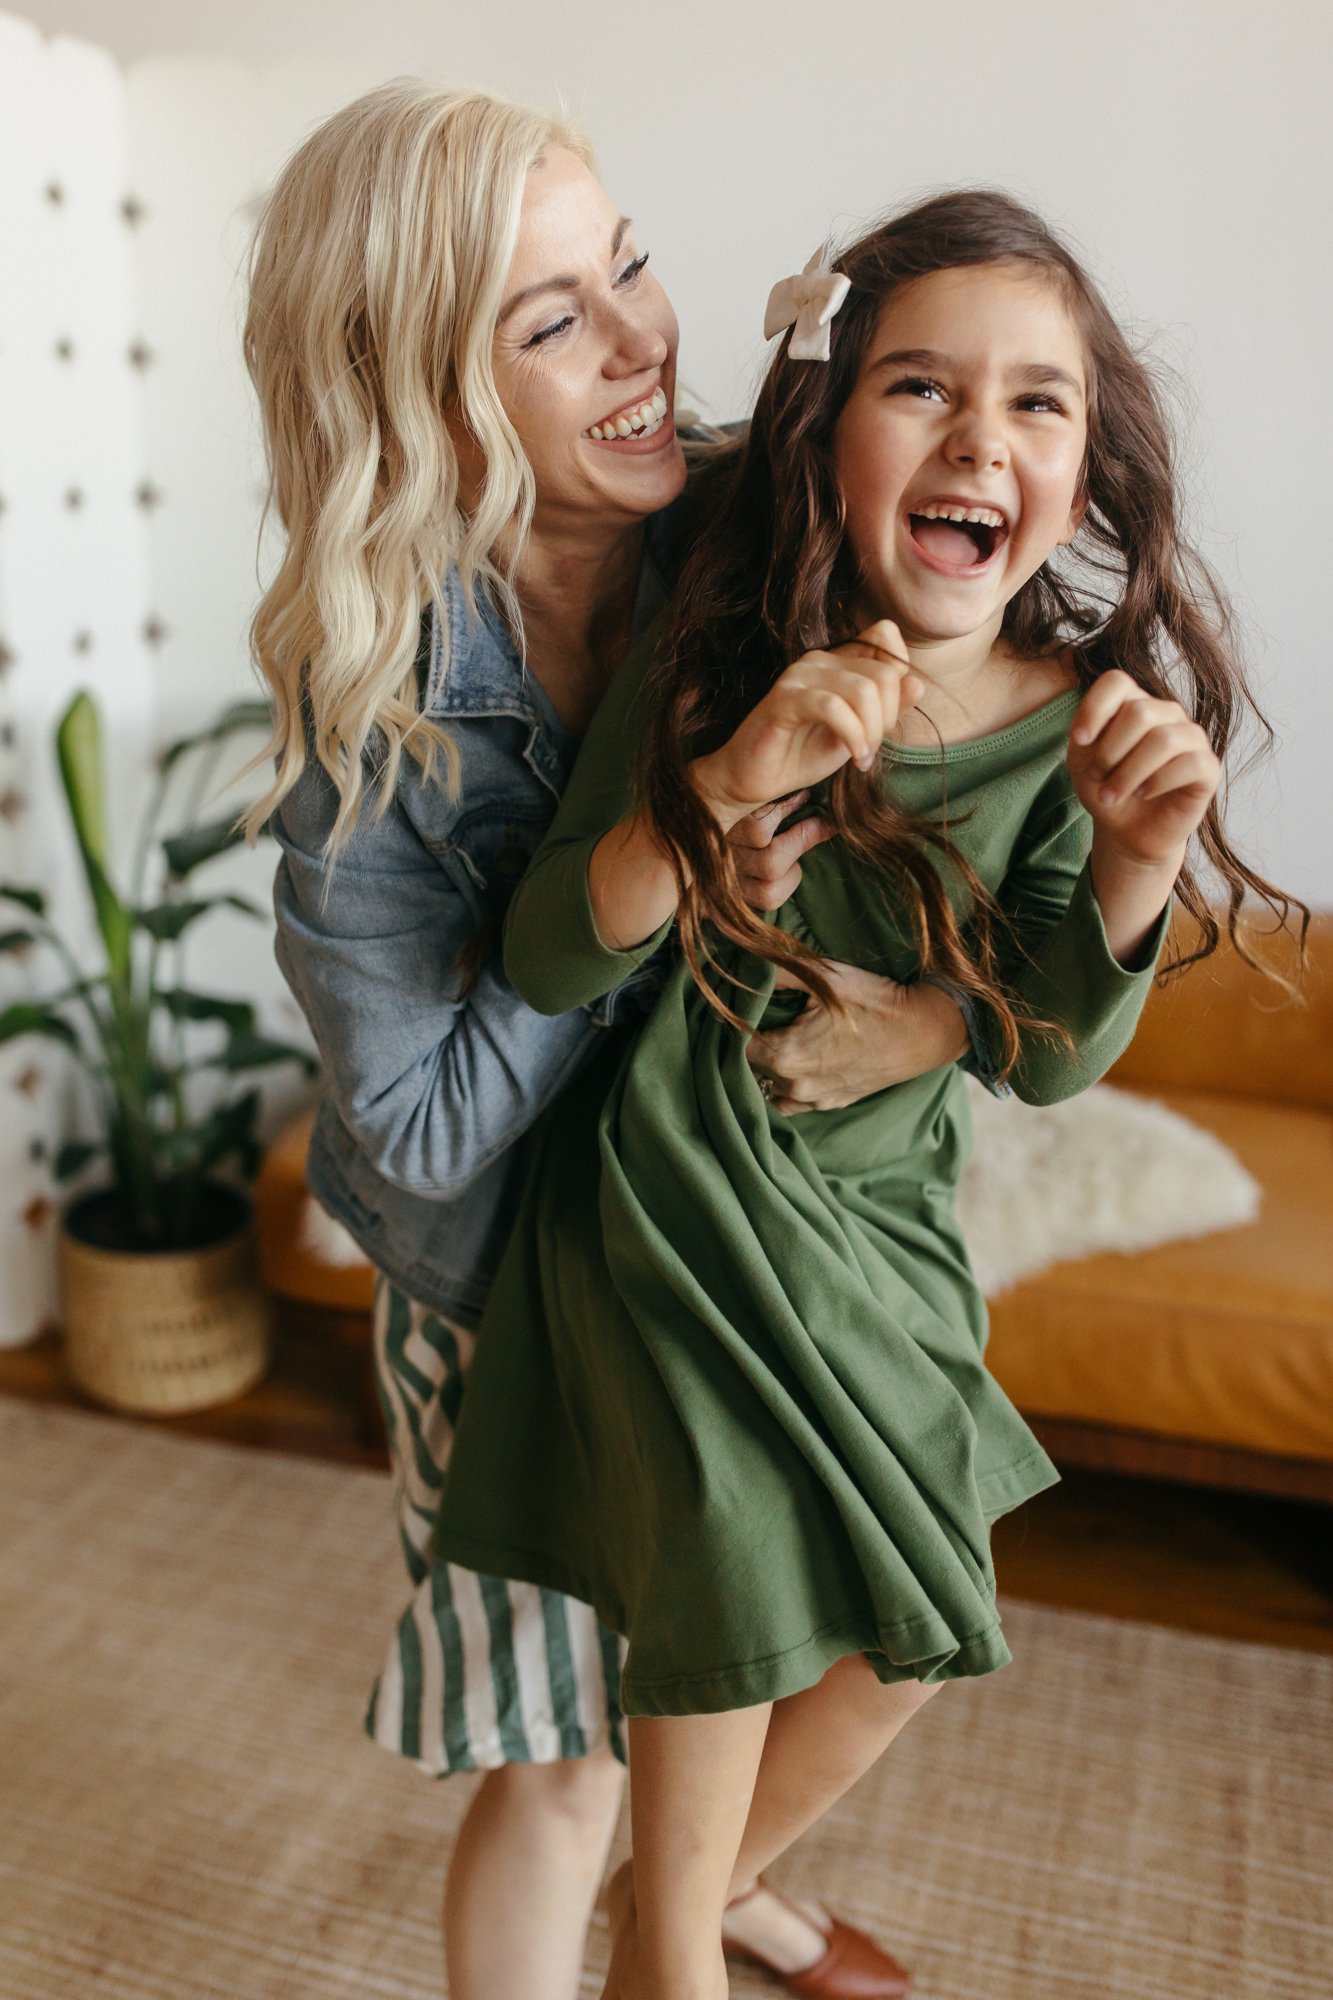 in-home family outfit photo ideas from san francisco family photographer and marin family photographer Cristin More_2.jpg